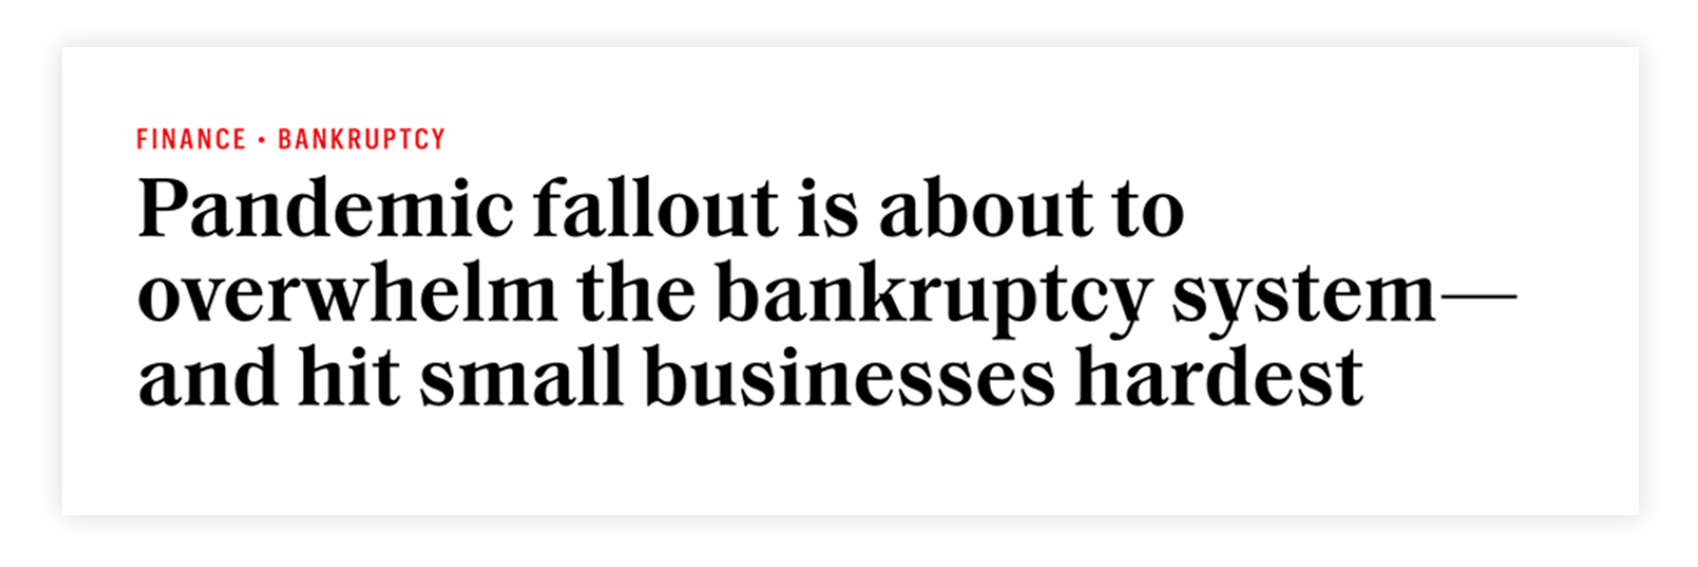 Pandemic fallout is about to overwhelm the bankruptcy system--and hit small businesses hardest